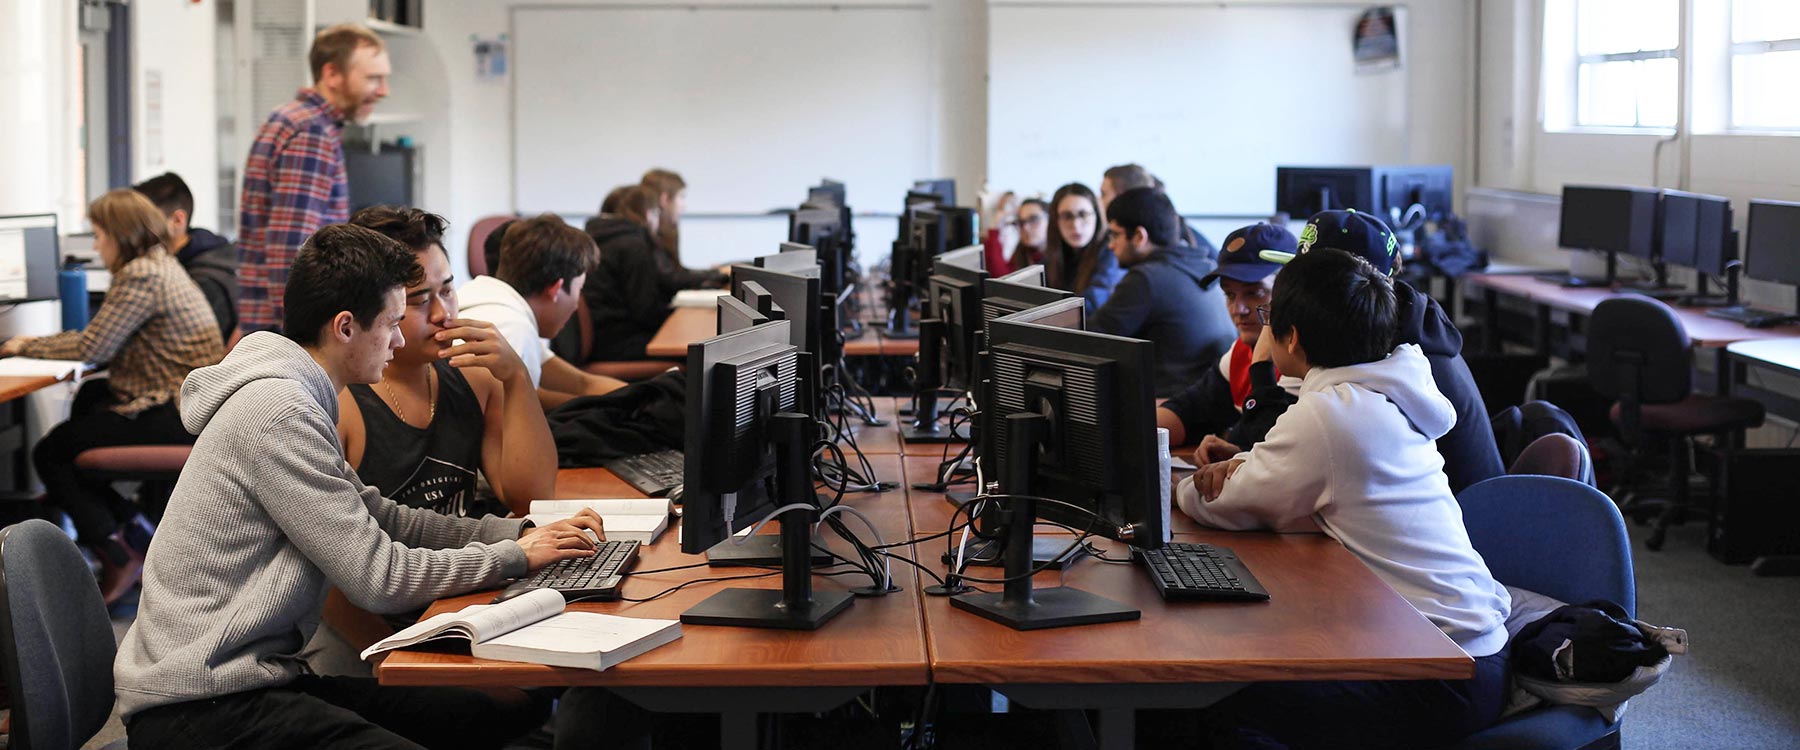 An instructor walks between rows of students in a computer lab.